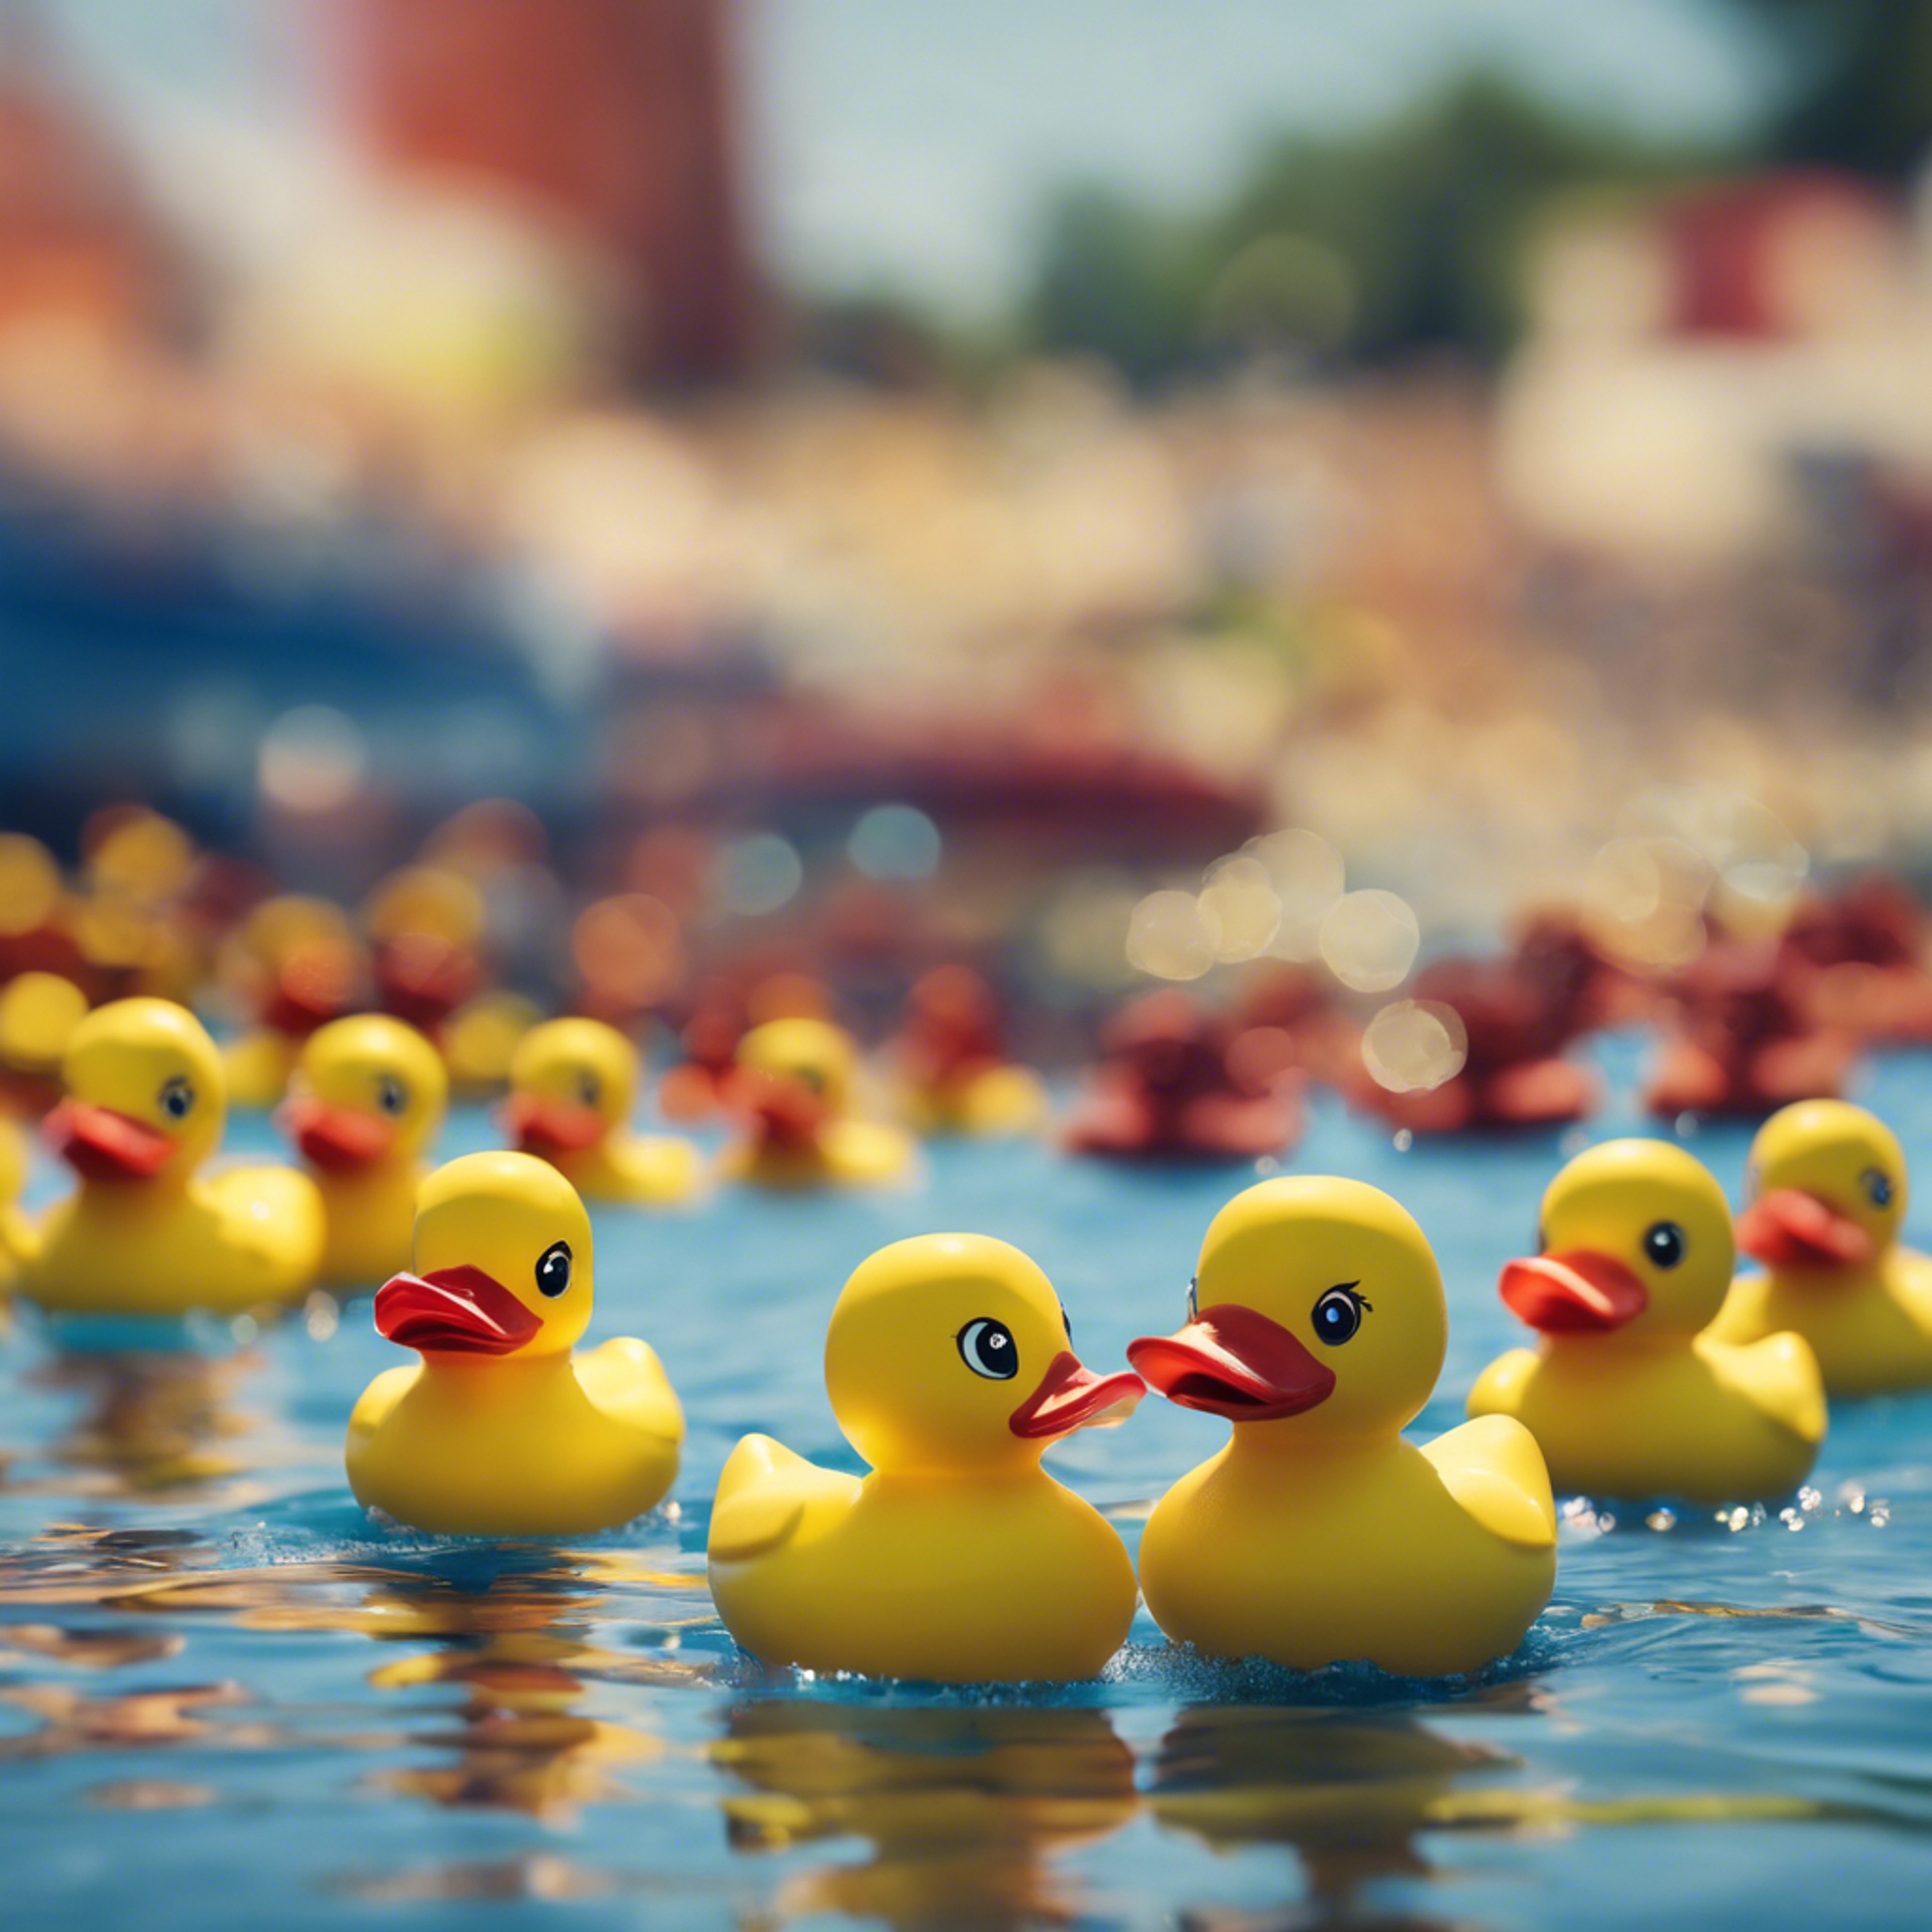 A team of vibrant rubber ducks lined up for a fun bath-time race. Fond d'écran[f8bfe643527940e89331]